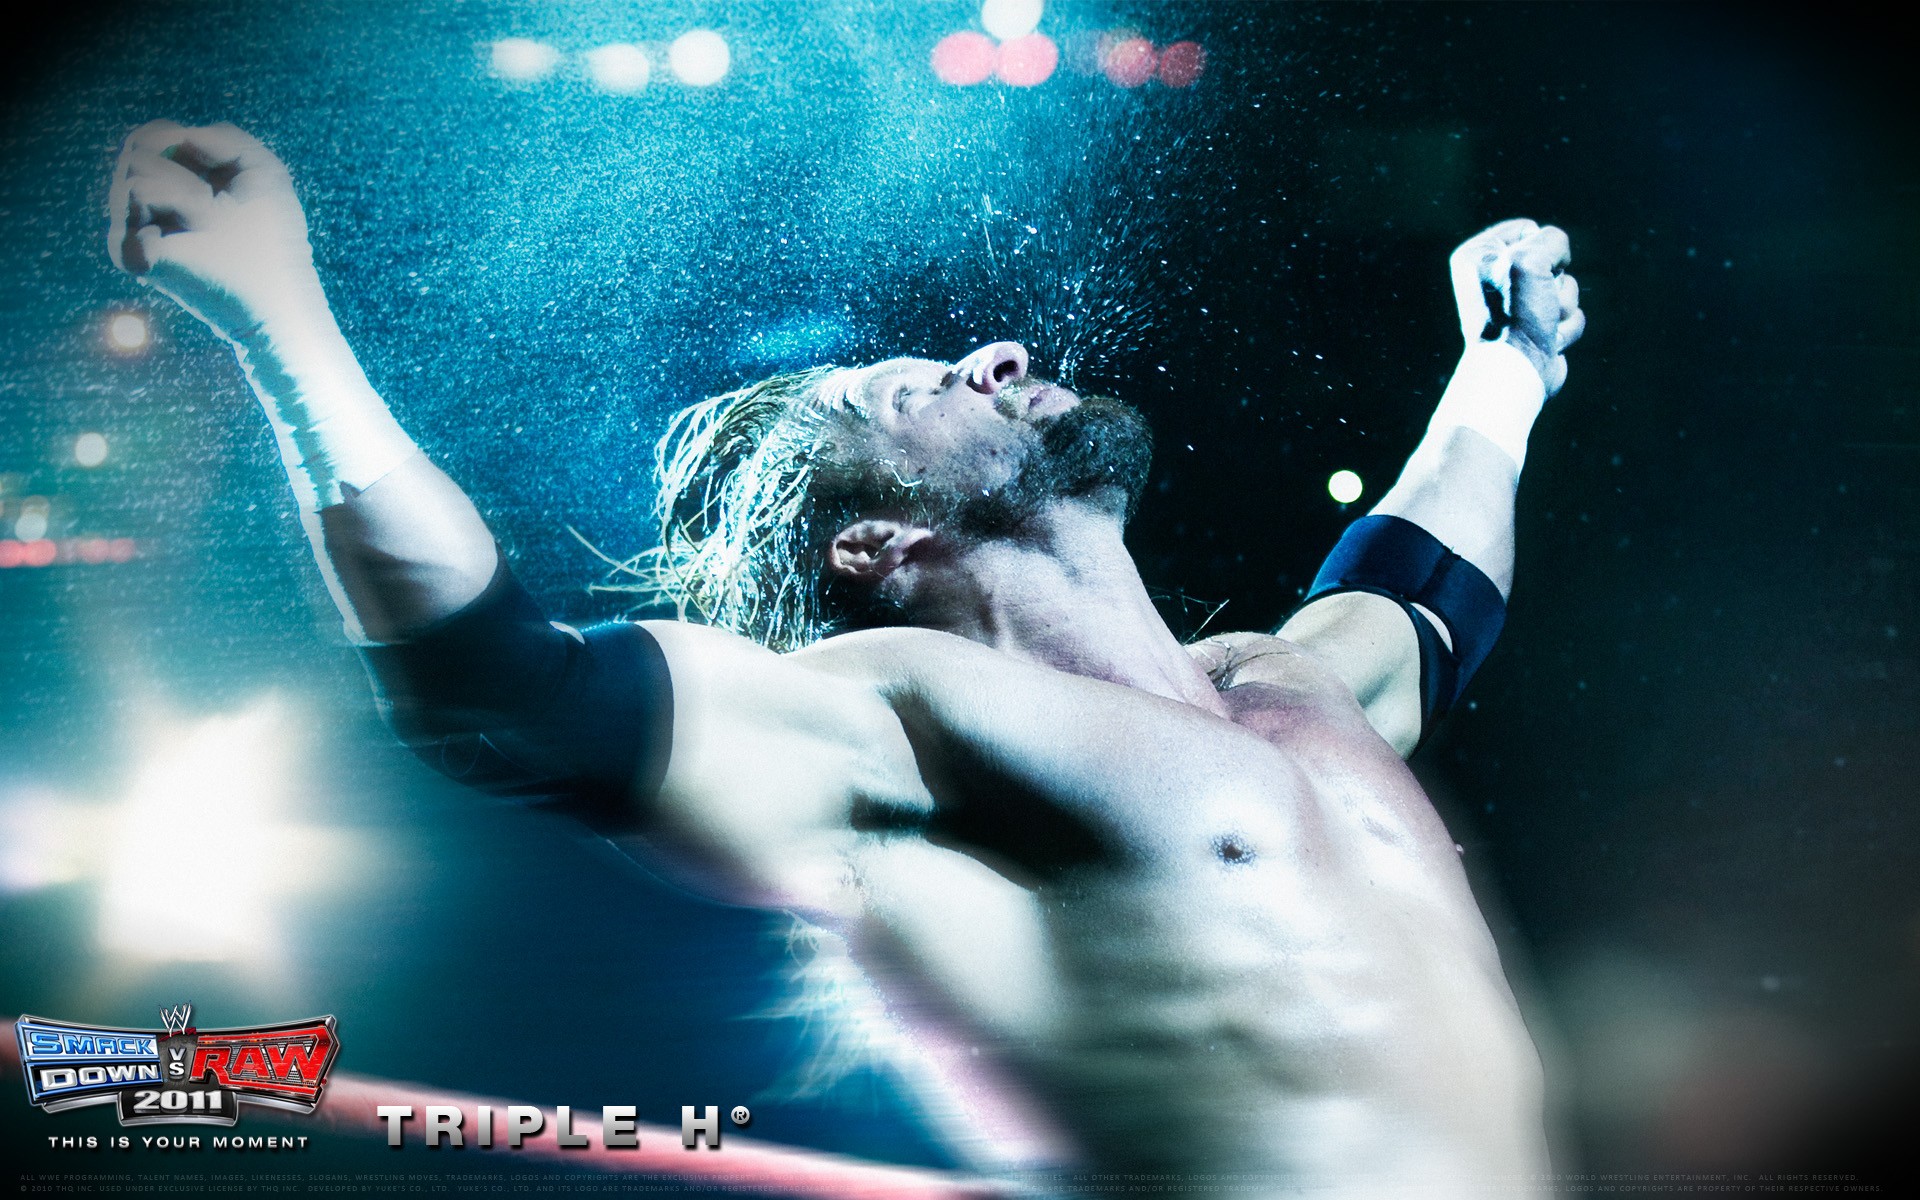 The Triple H Wallpaper iPhone